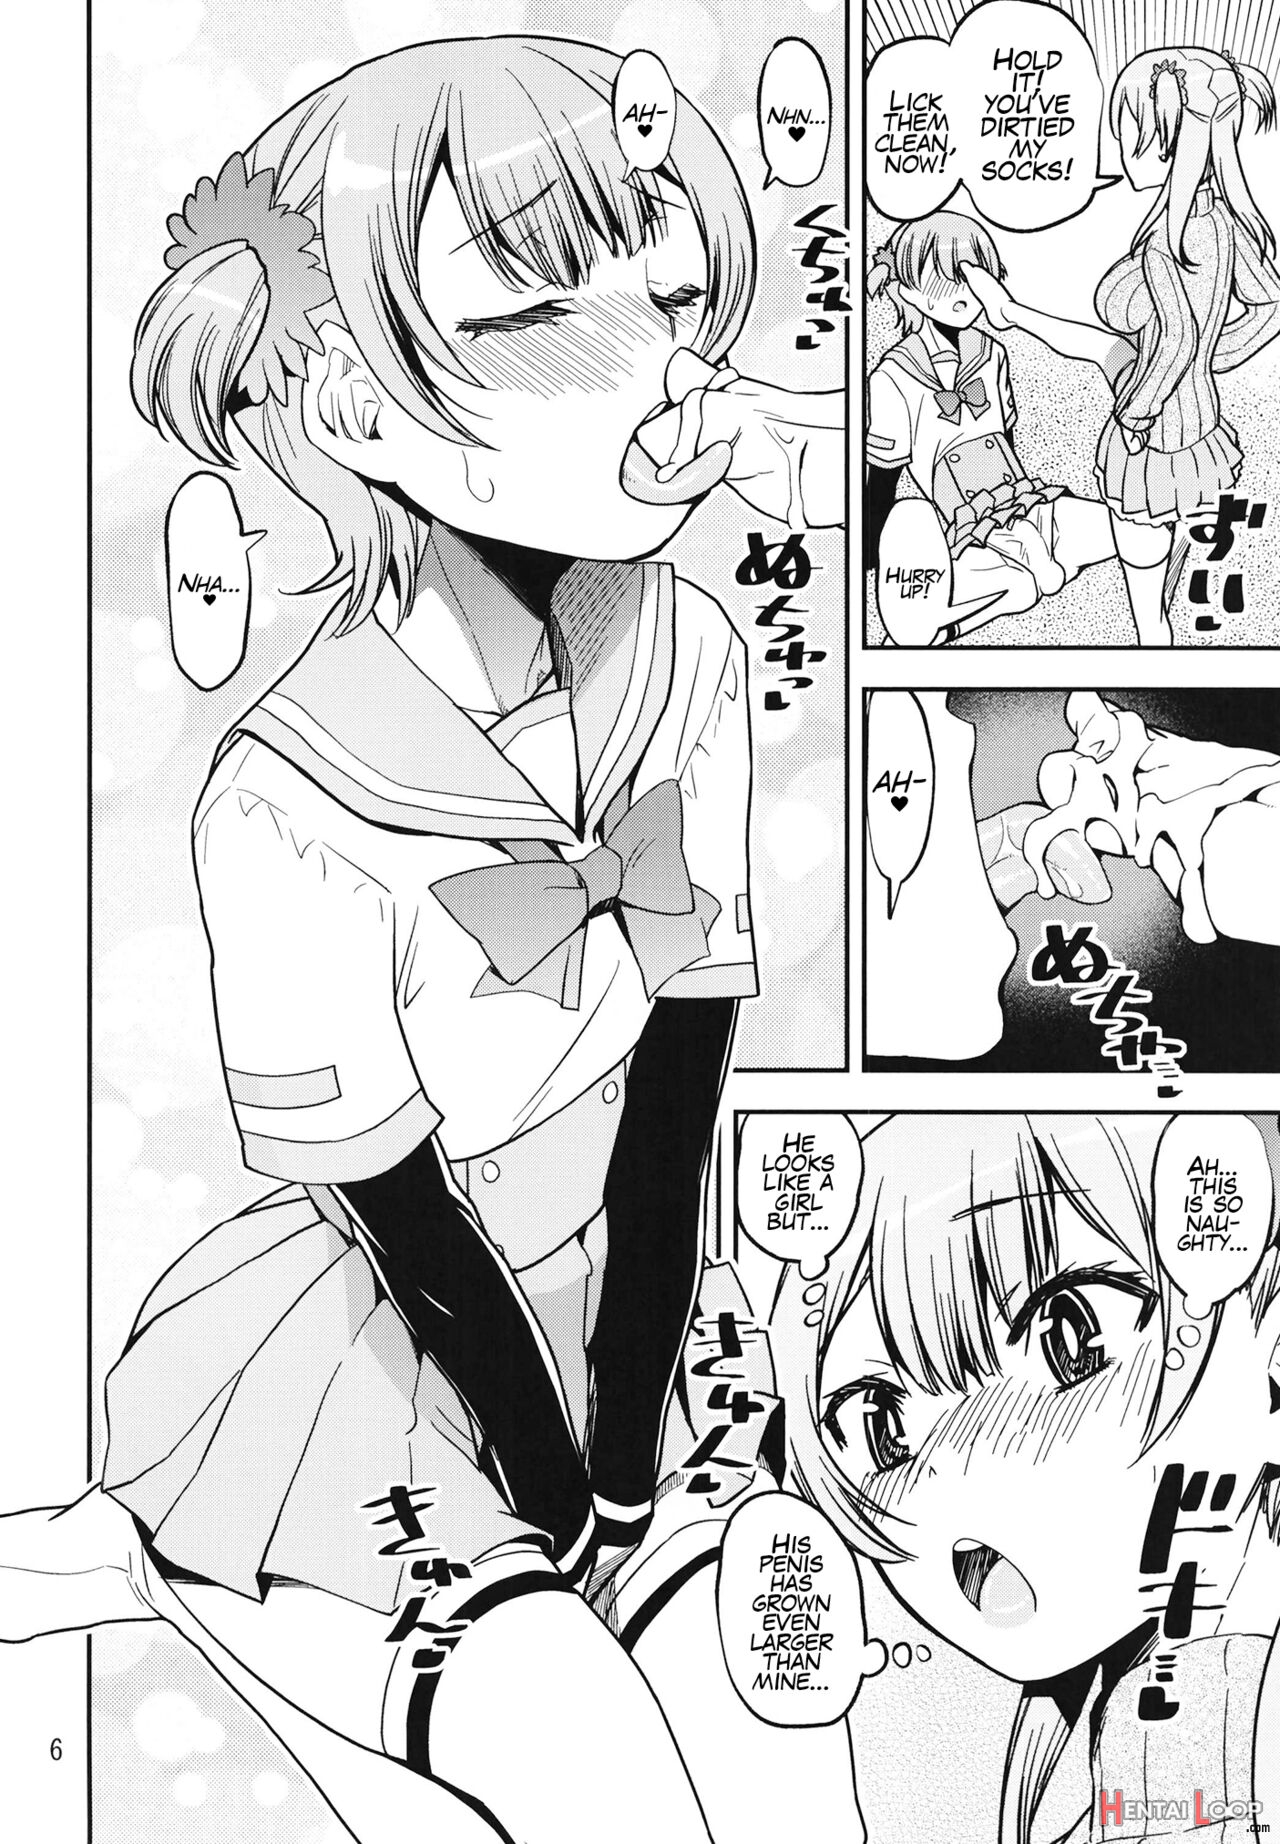 Rena's Little Brother Likes To Dress As A Girl, What A Freak! page 6